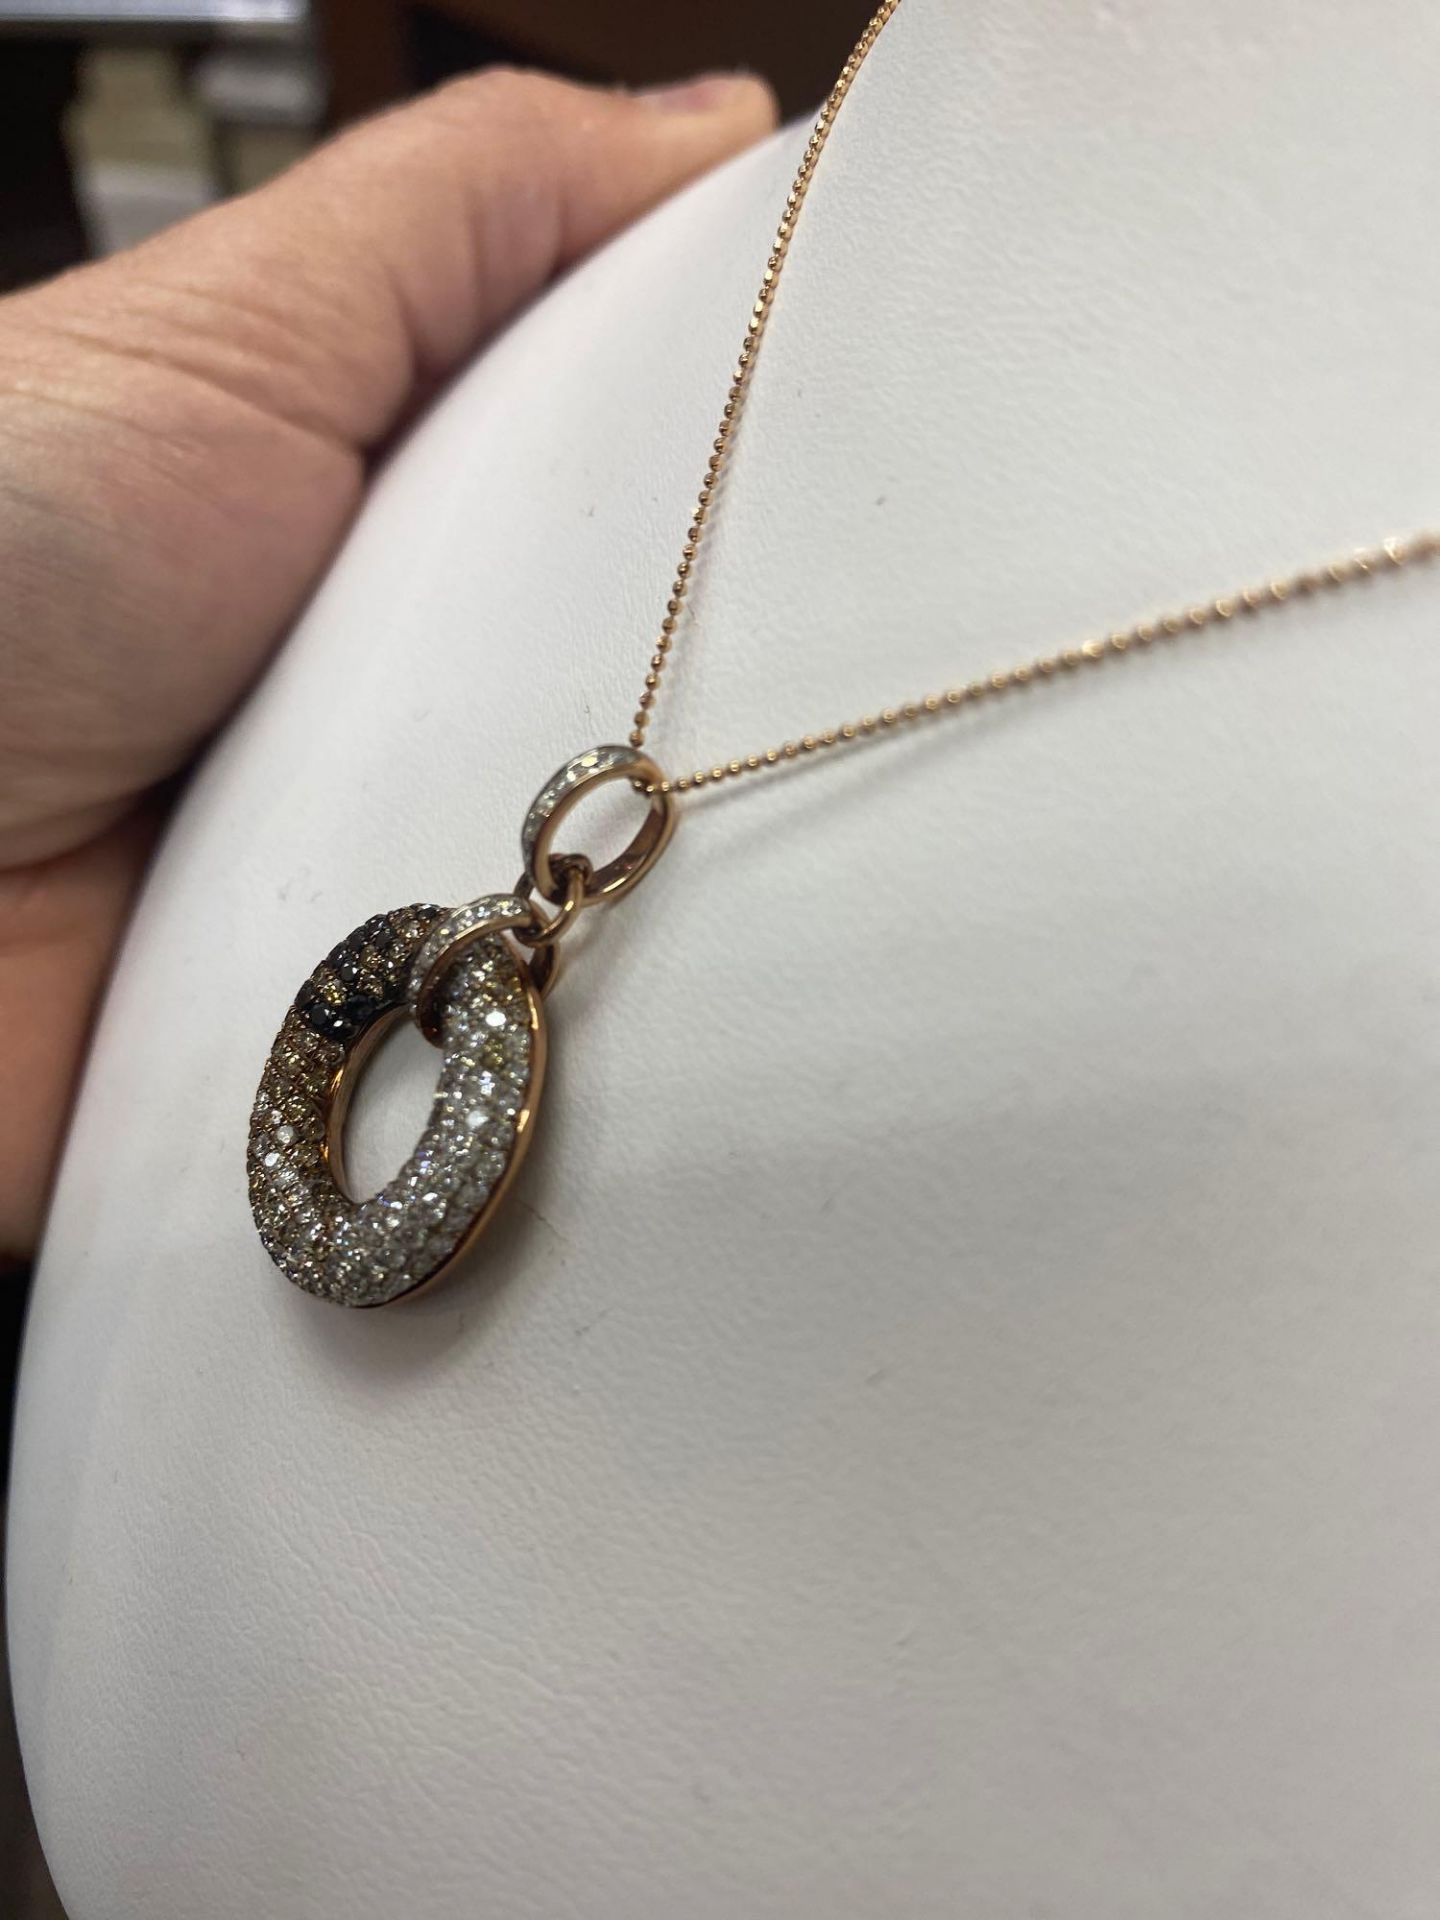 .85CT WHITE DIA. .37CT BLK DIA. .75CT BROWN DIA. 14K ROSE GOLD PENDANT AND CHAIN - Image 2 of 5